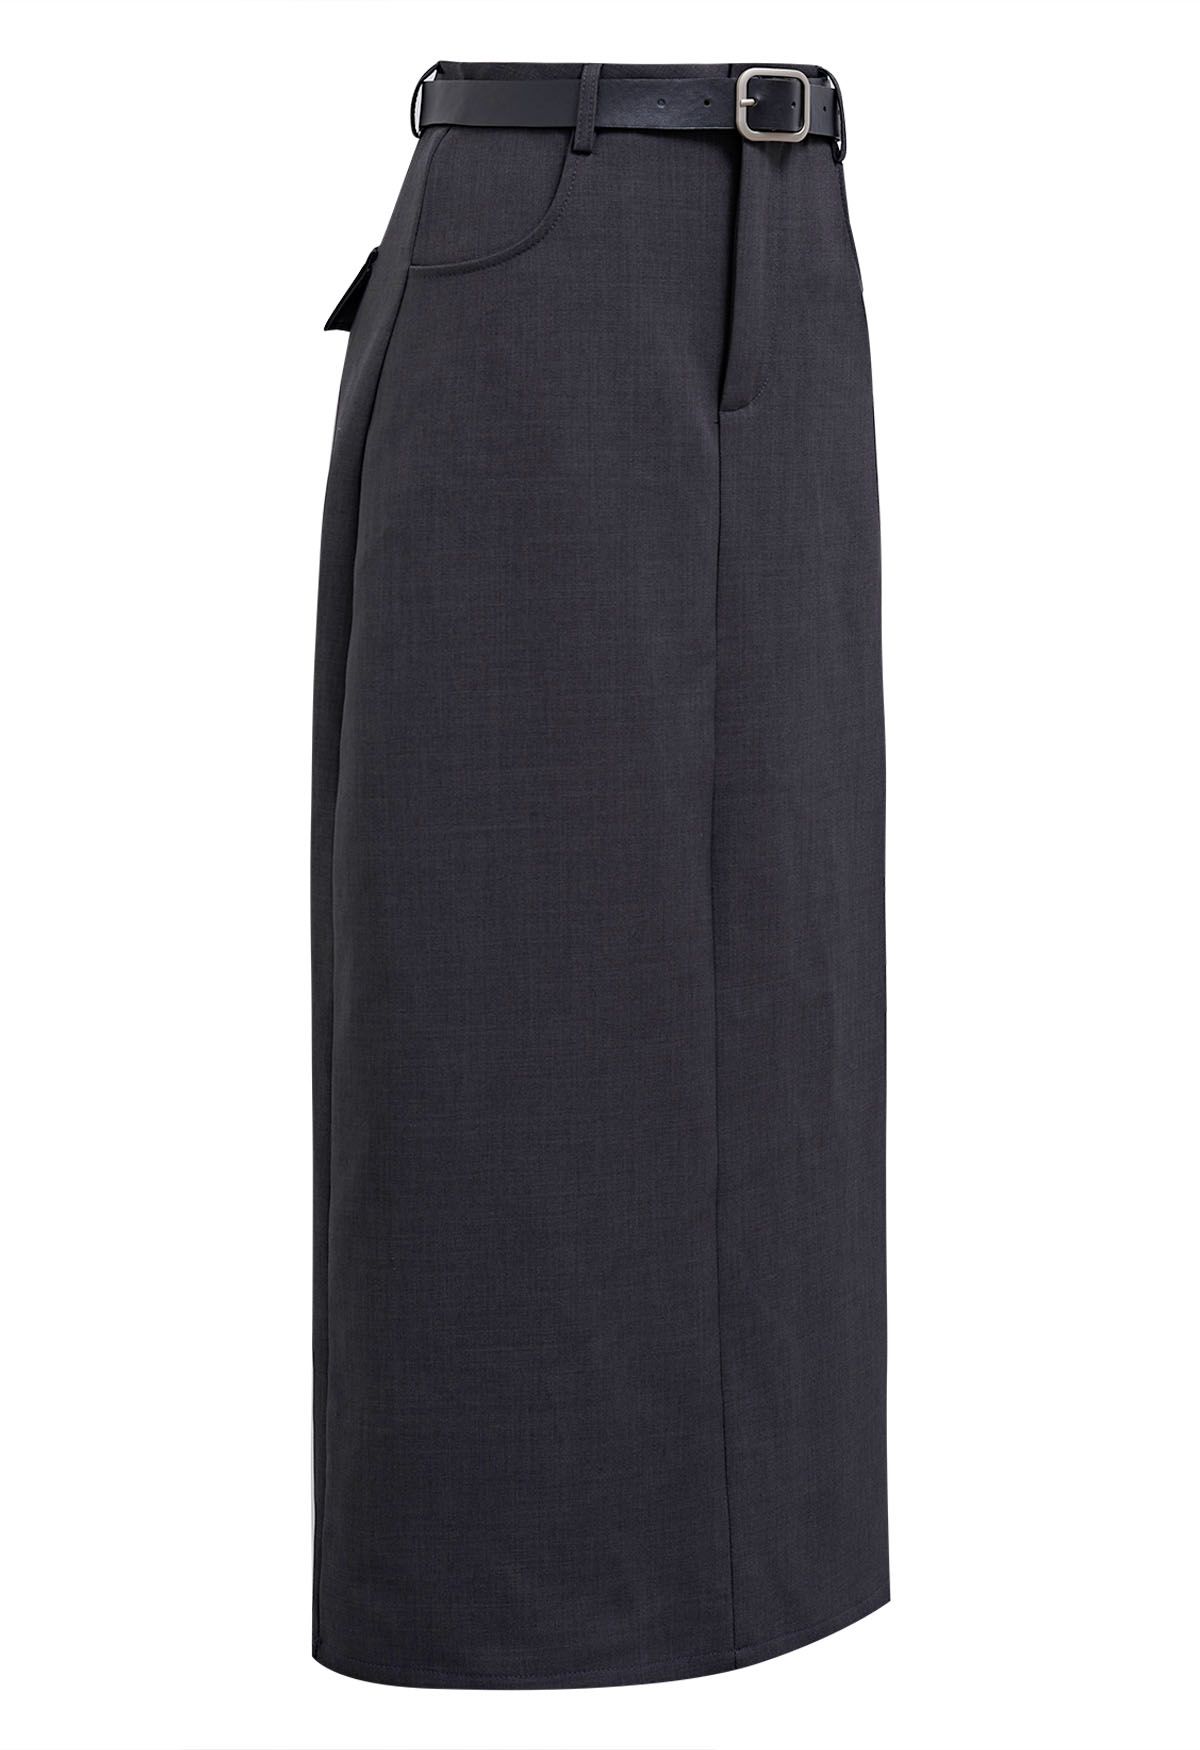 Slit Back Belted Maxi Skirt in Smoke - Retro, Indie and Unique Fashion